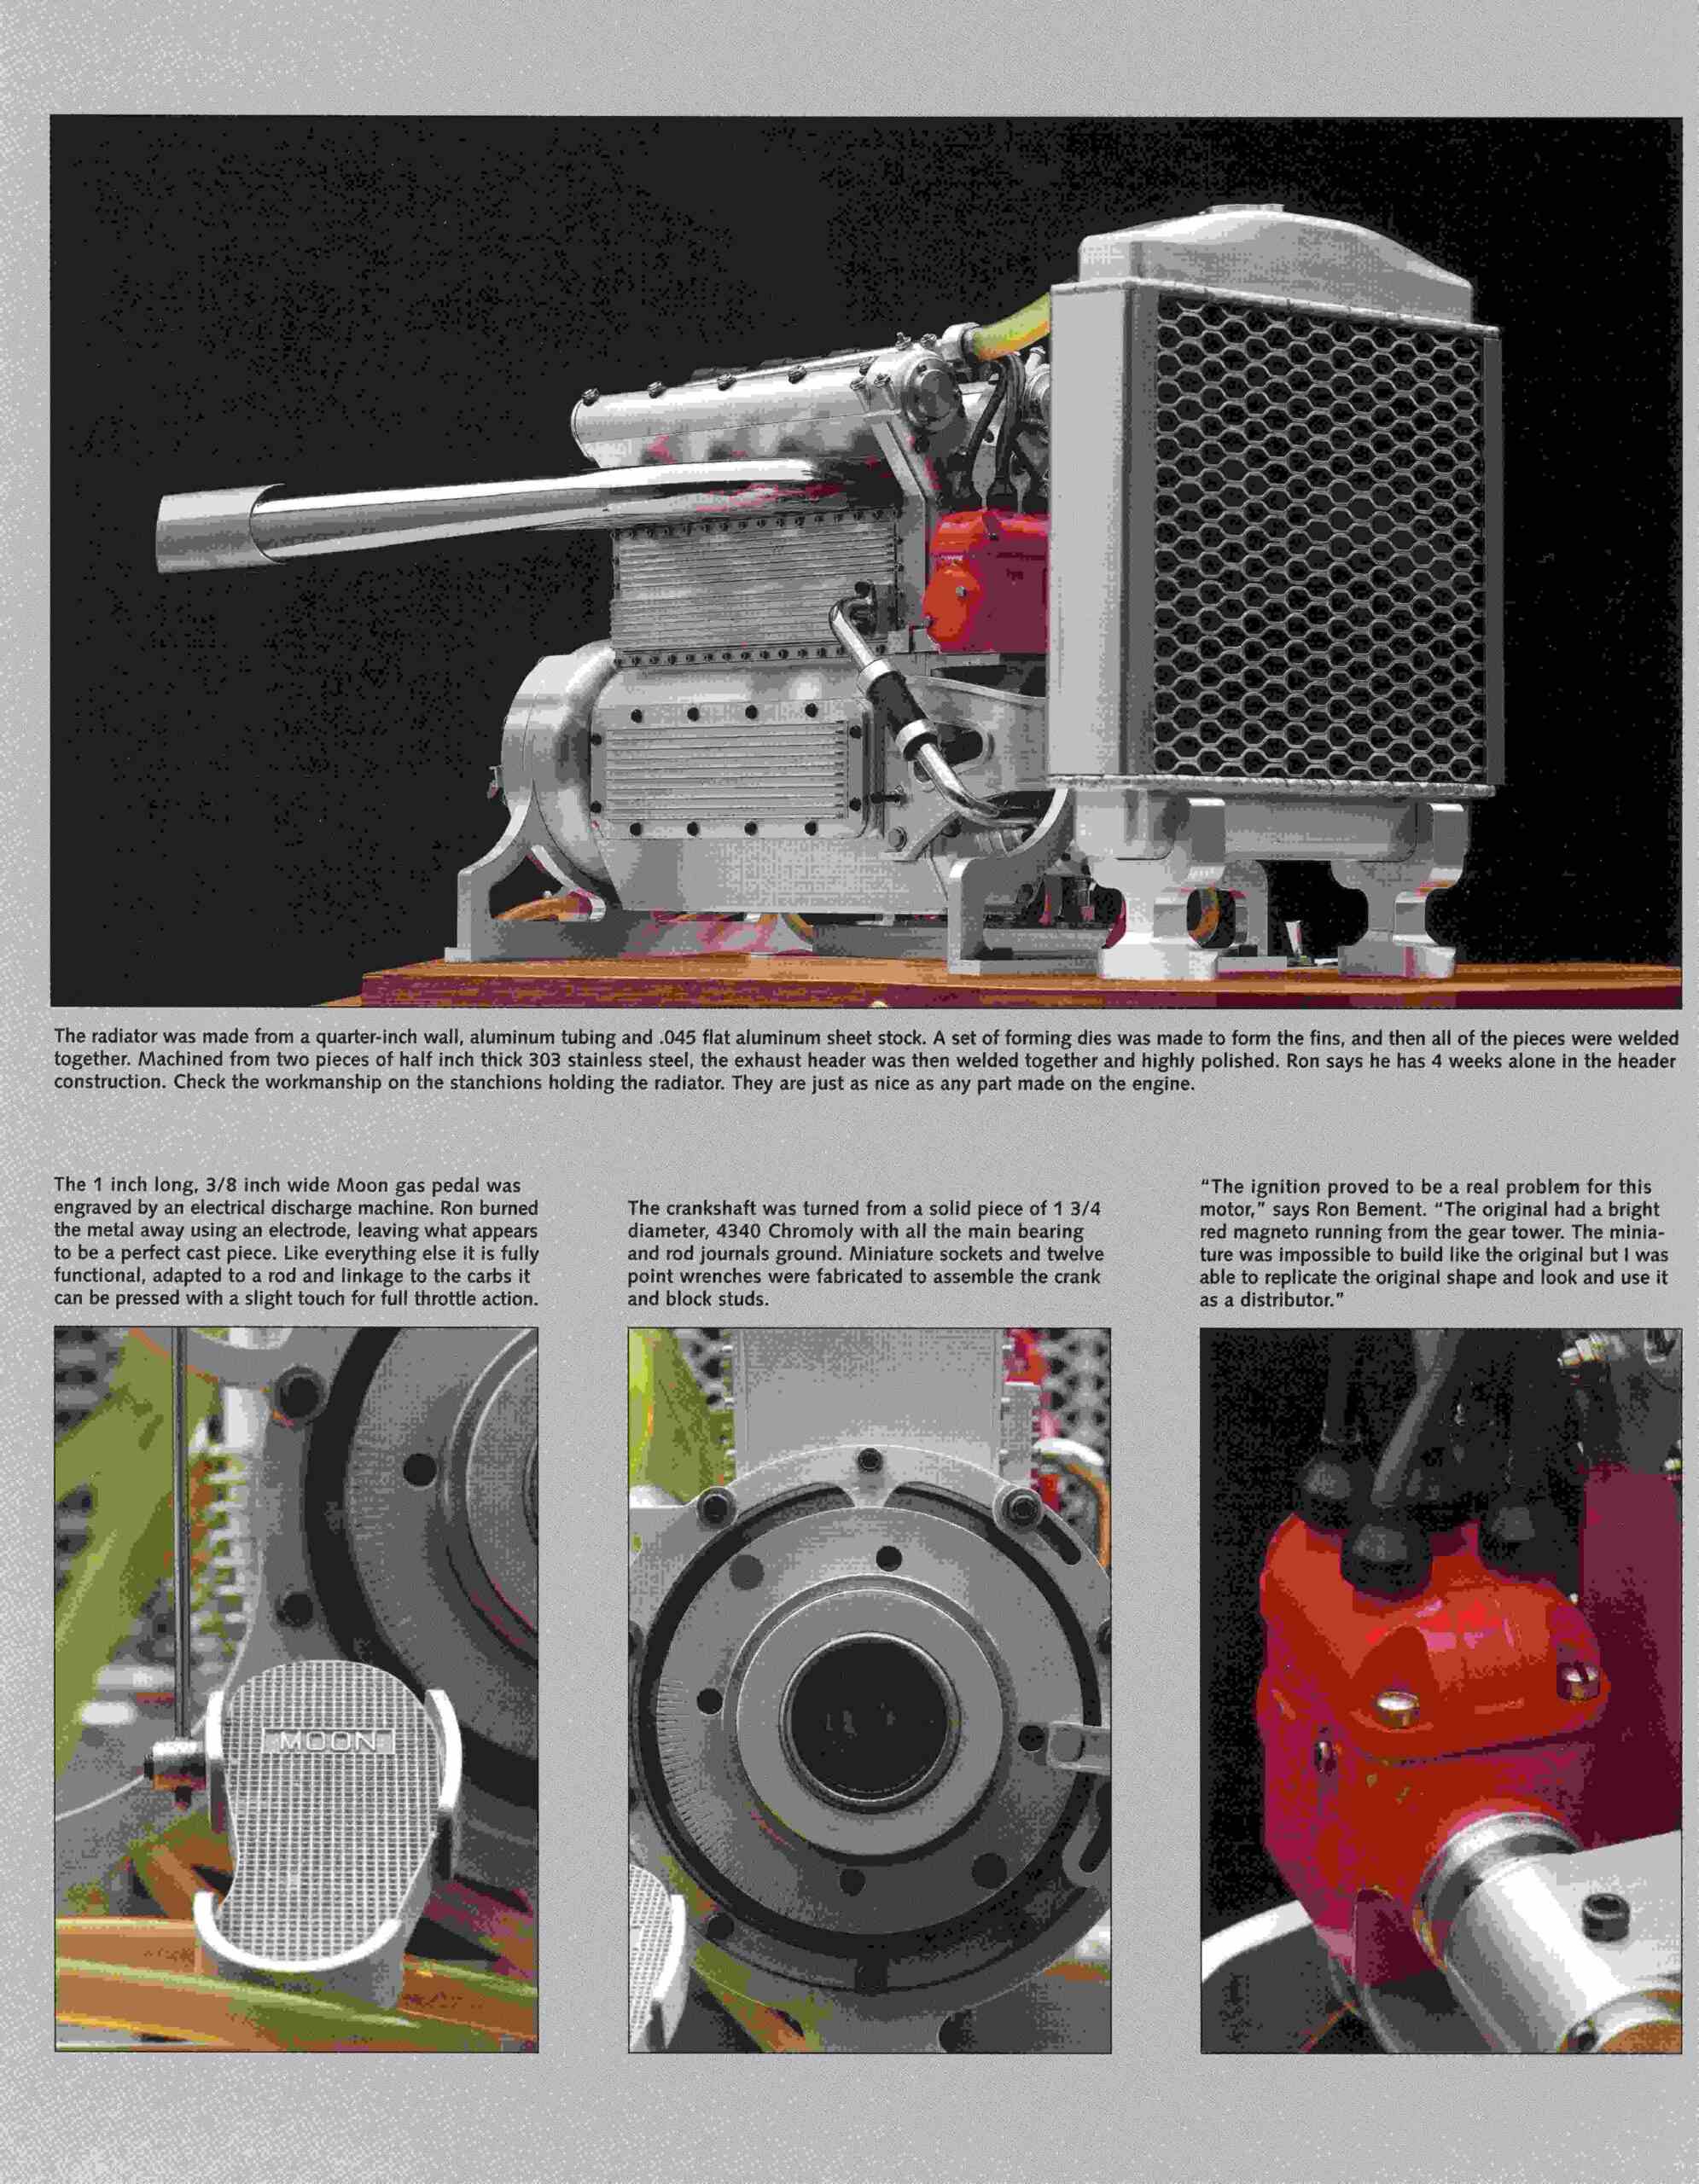 A picture of a motor design with description